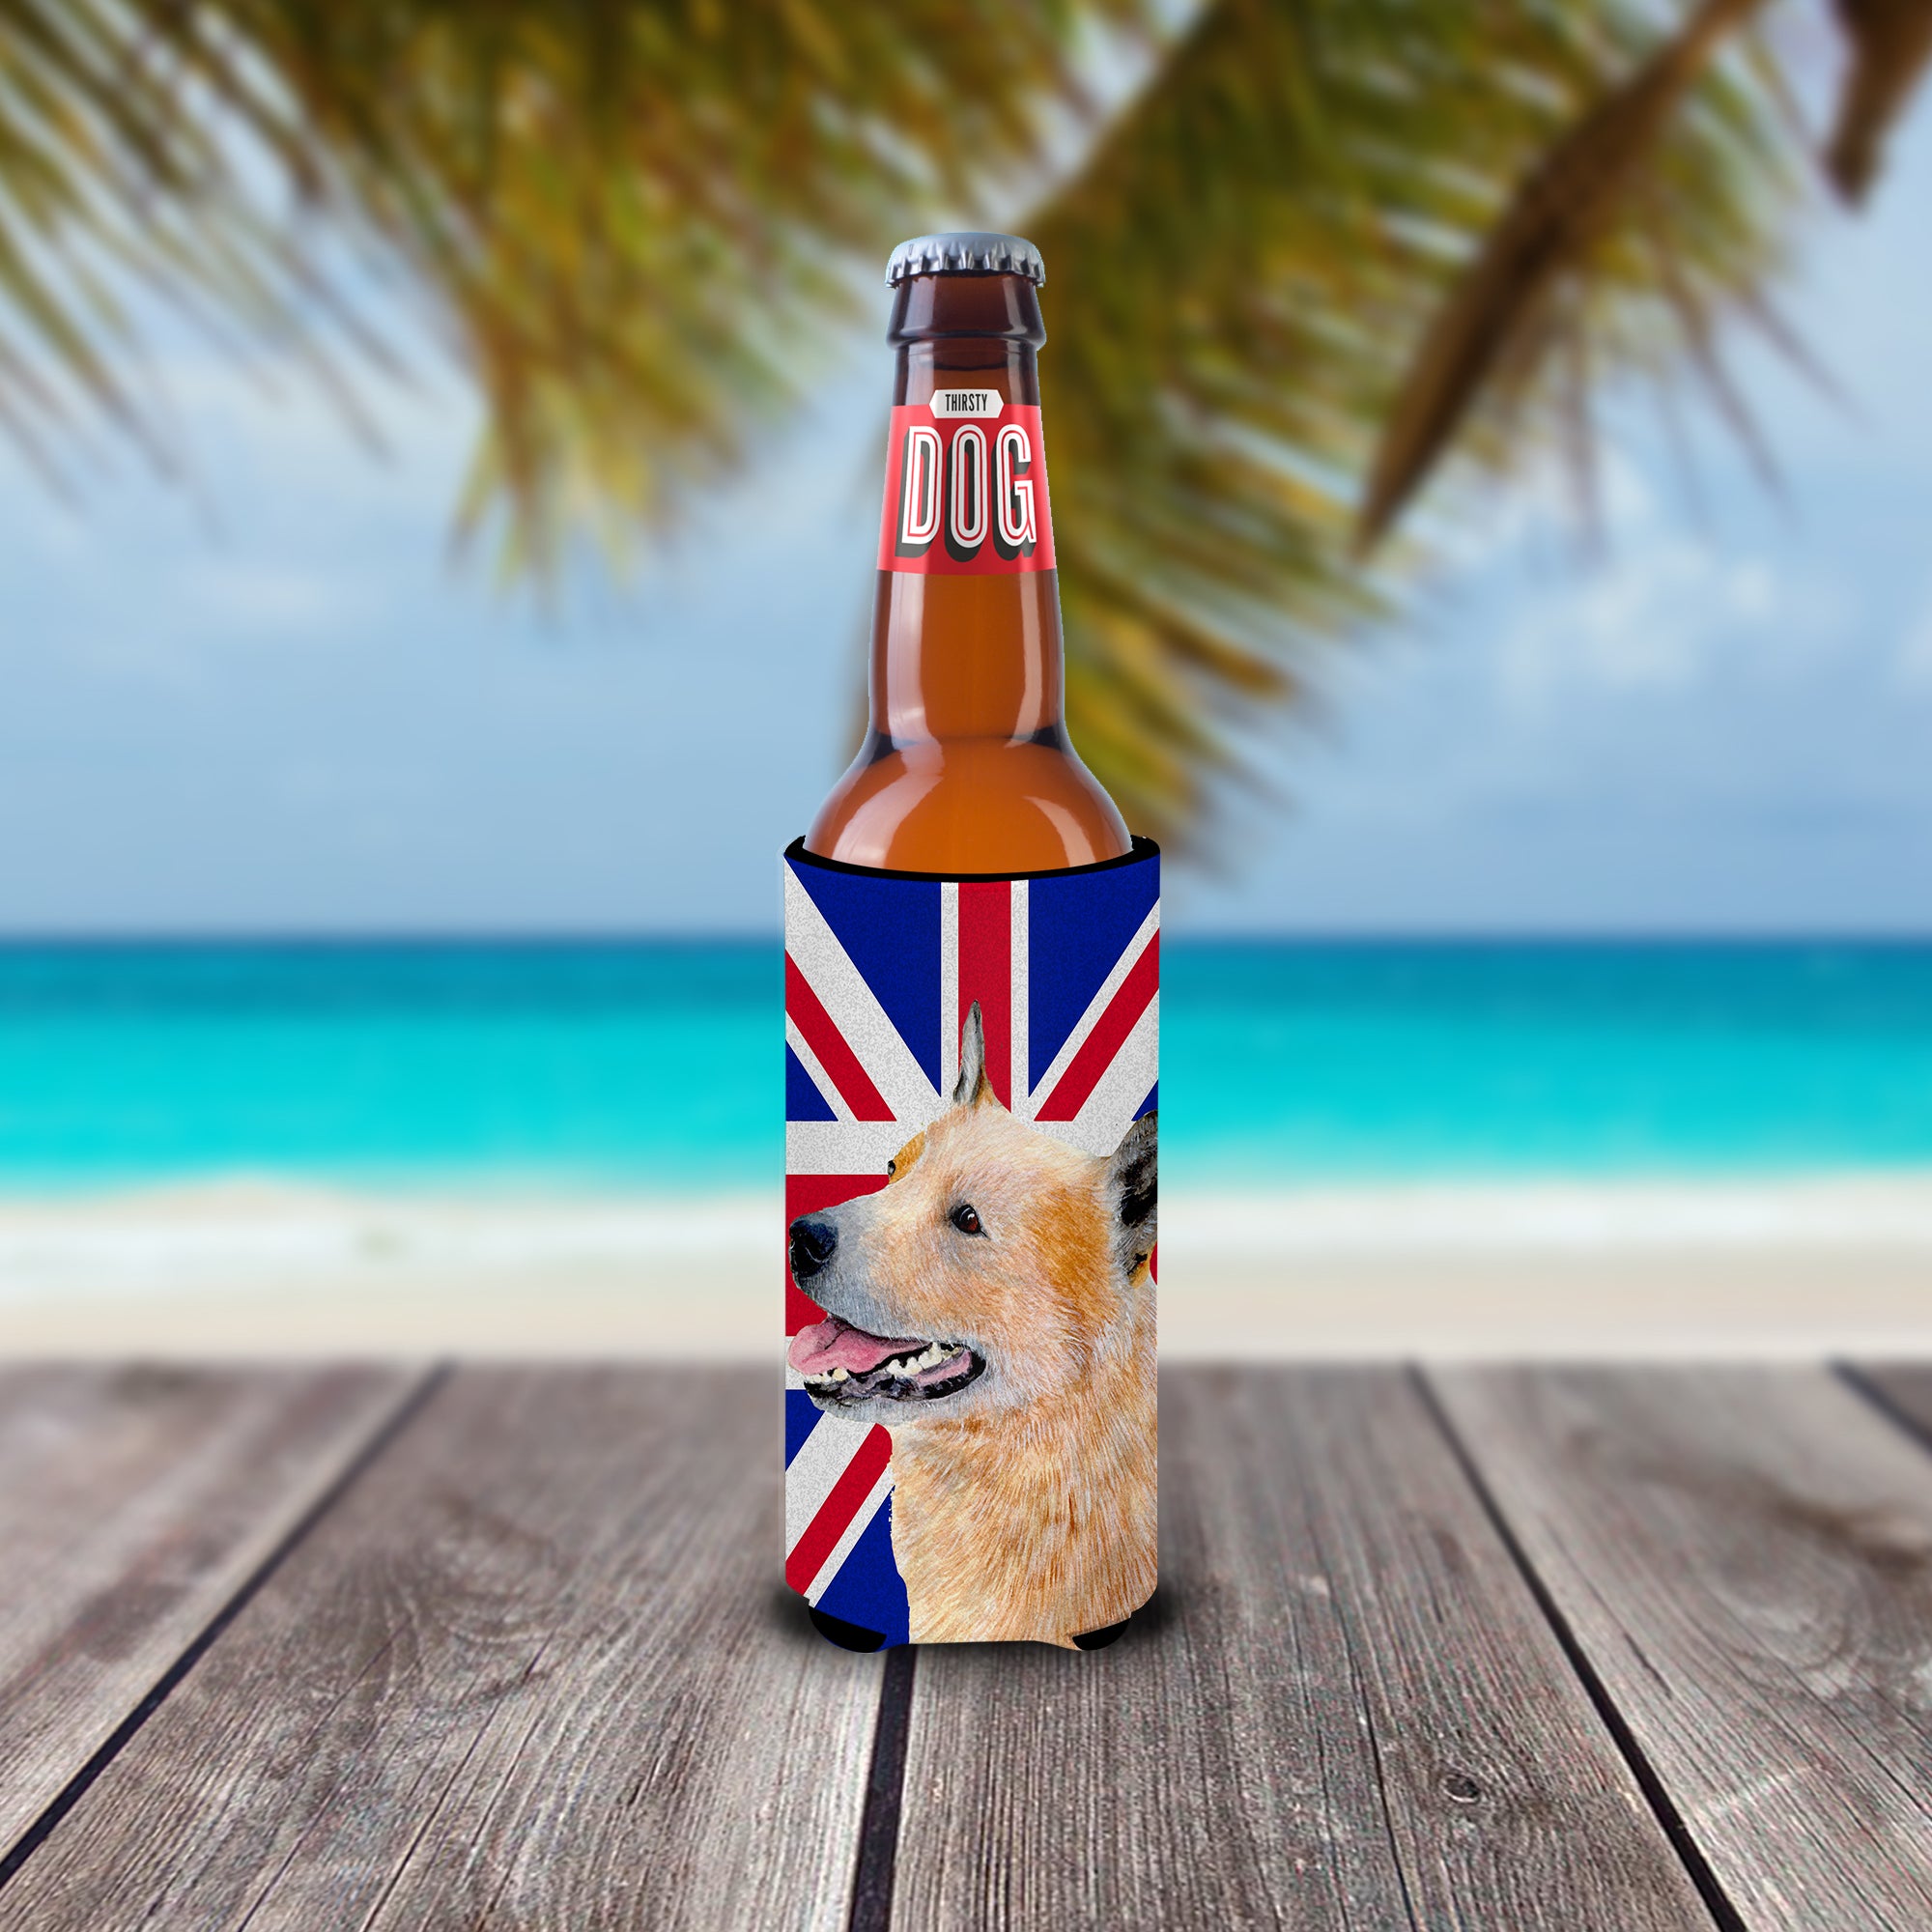 Australian Cattle Dog with English Union Jack British Flag Ultra Beverage Insulators for slim cans LH9469MUK.